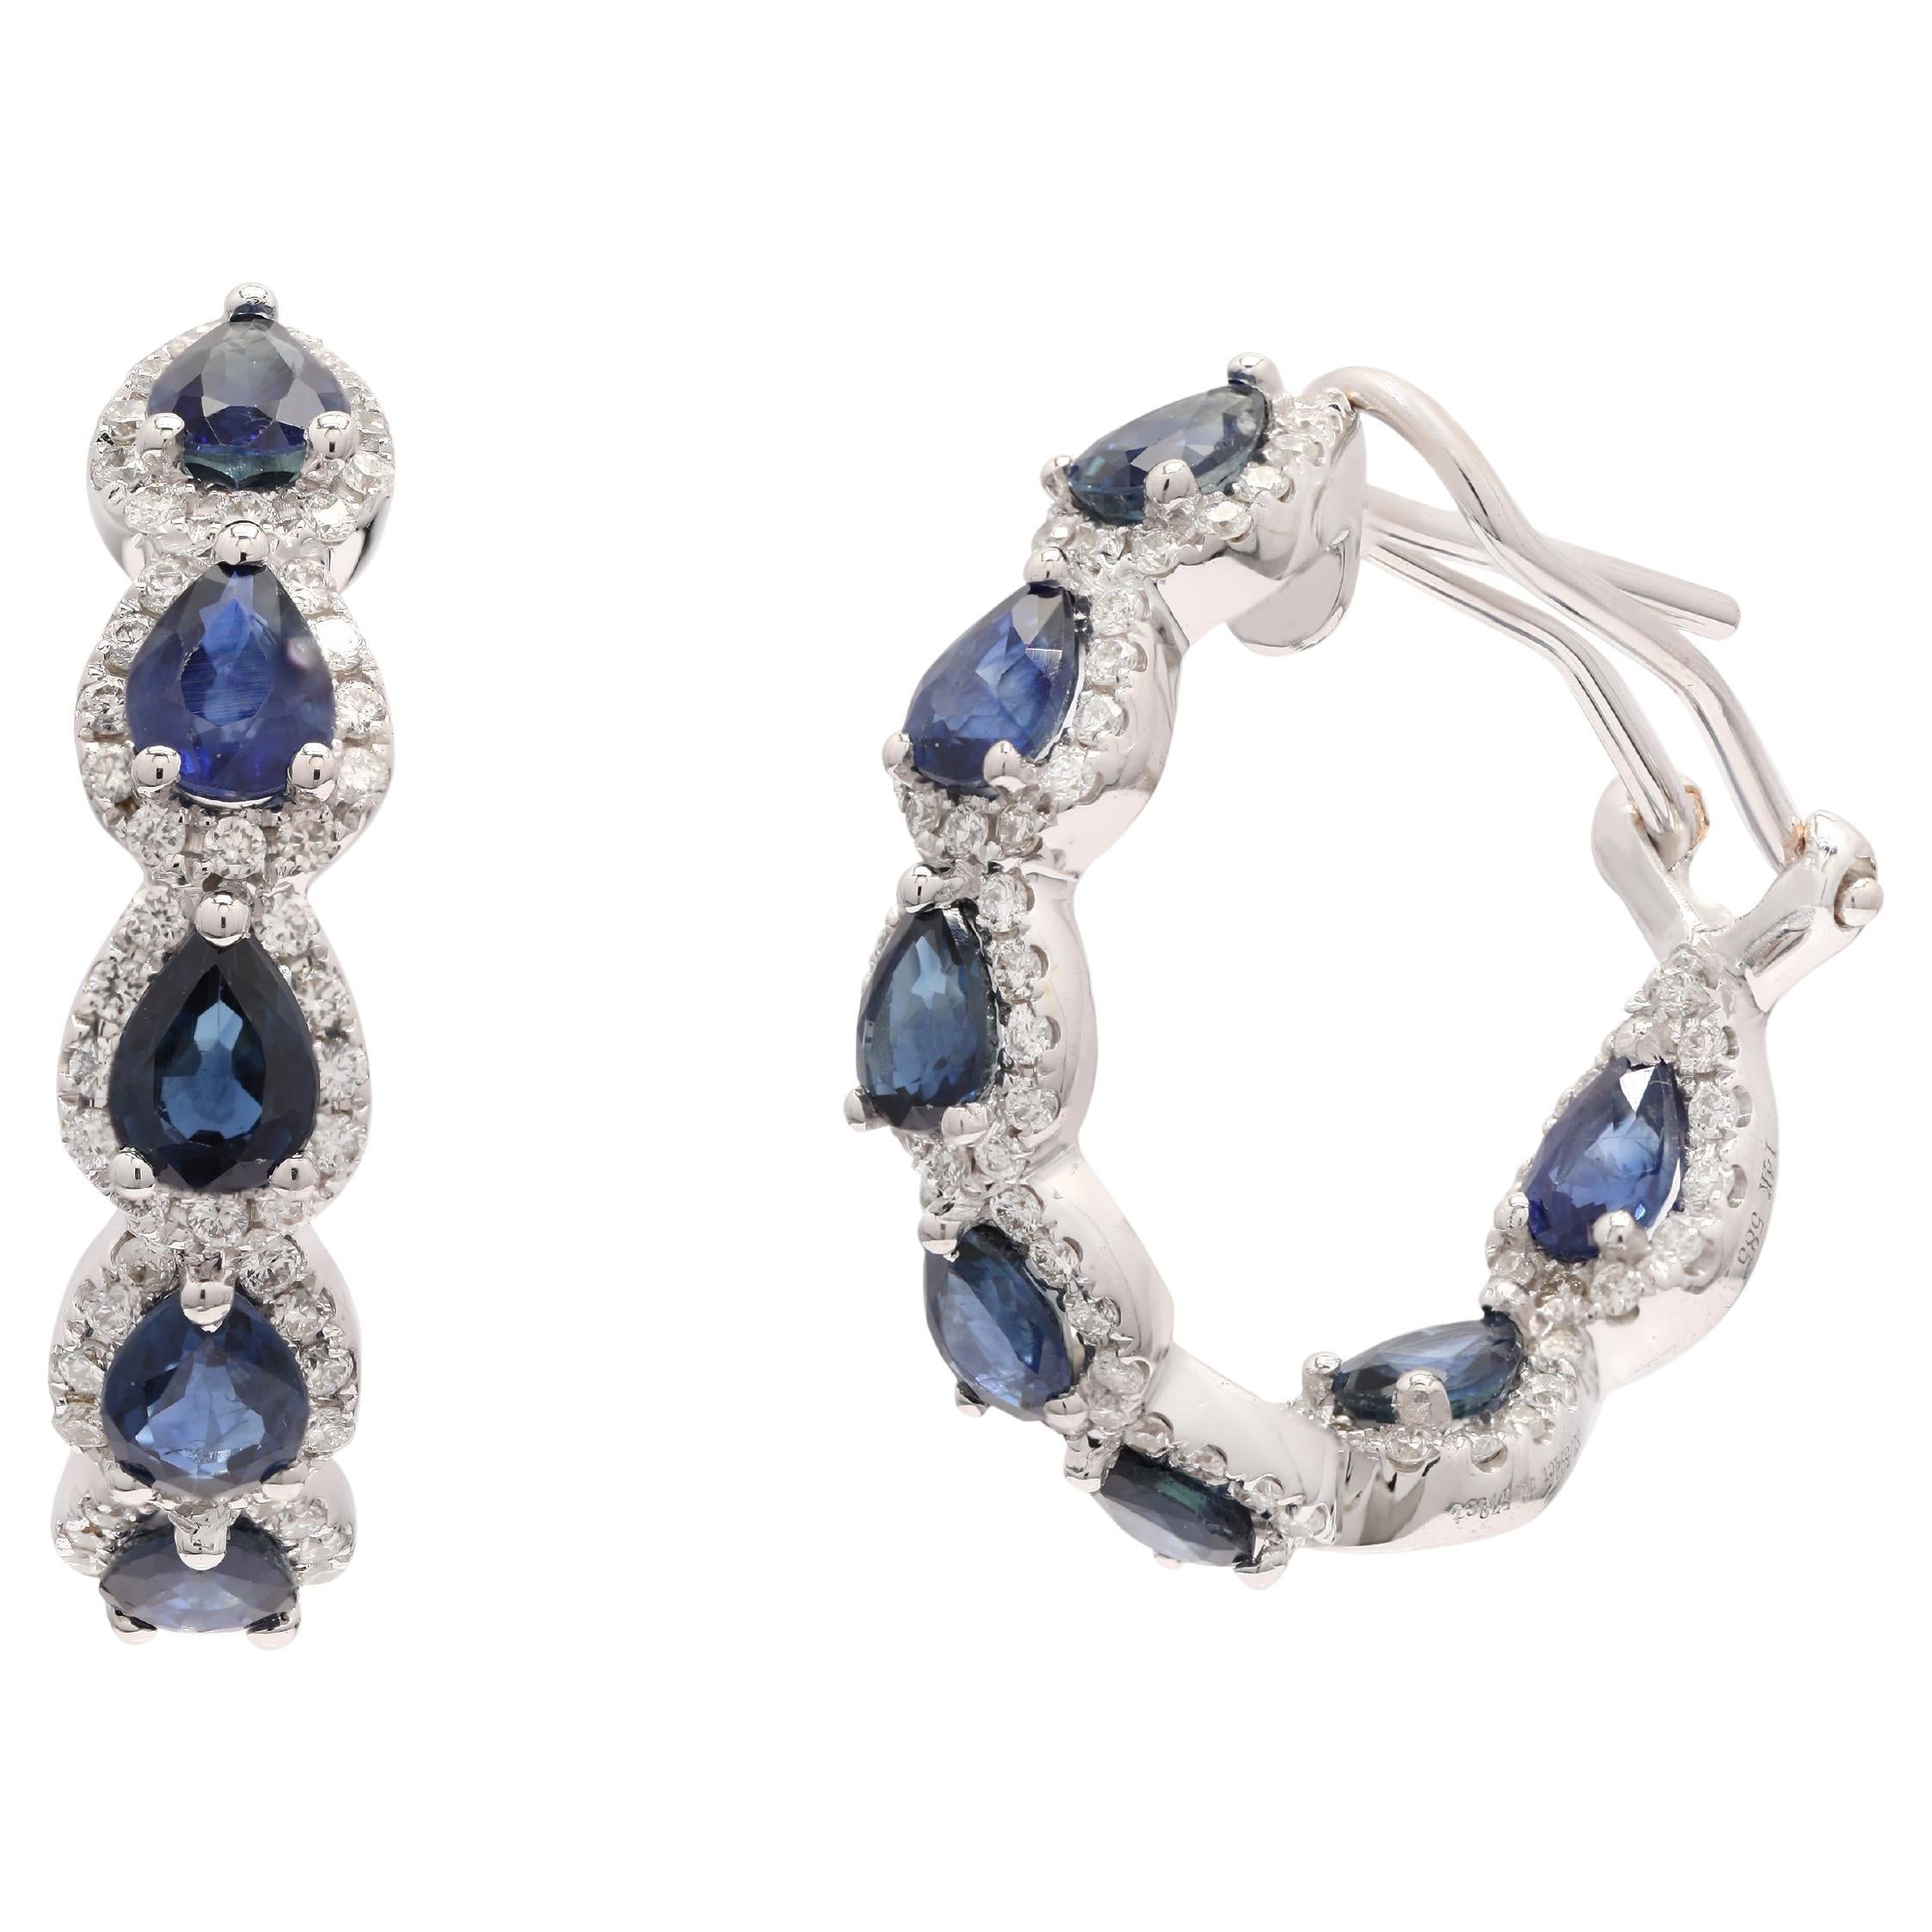 2.59 Carat Pear Cut Blue Sapphire and Diamond Hoop Earrings in 14K White Gold  For Sale